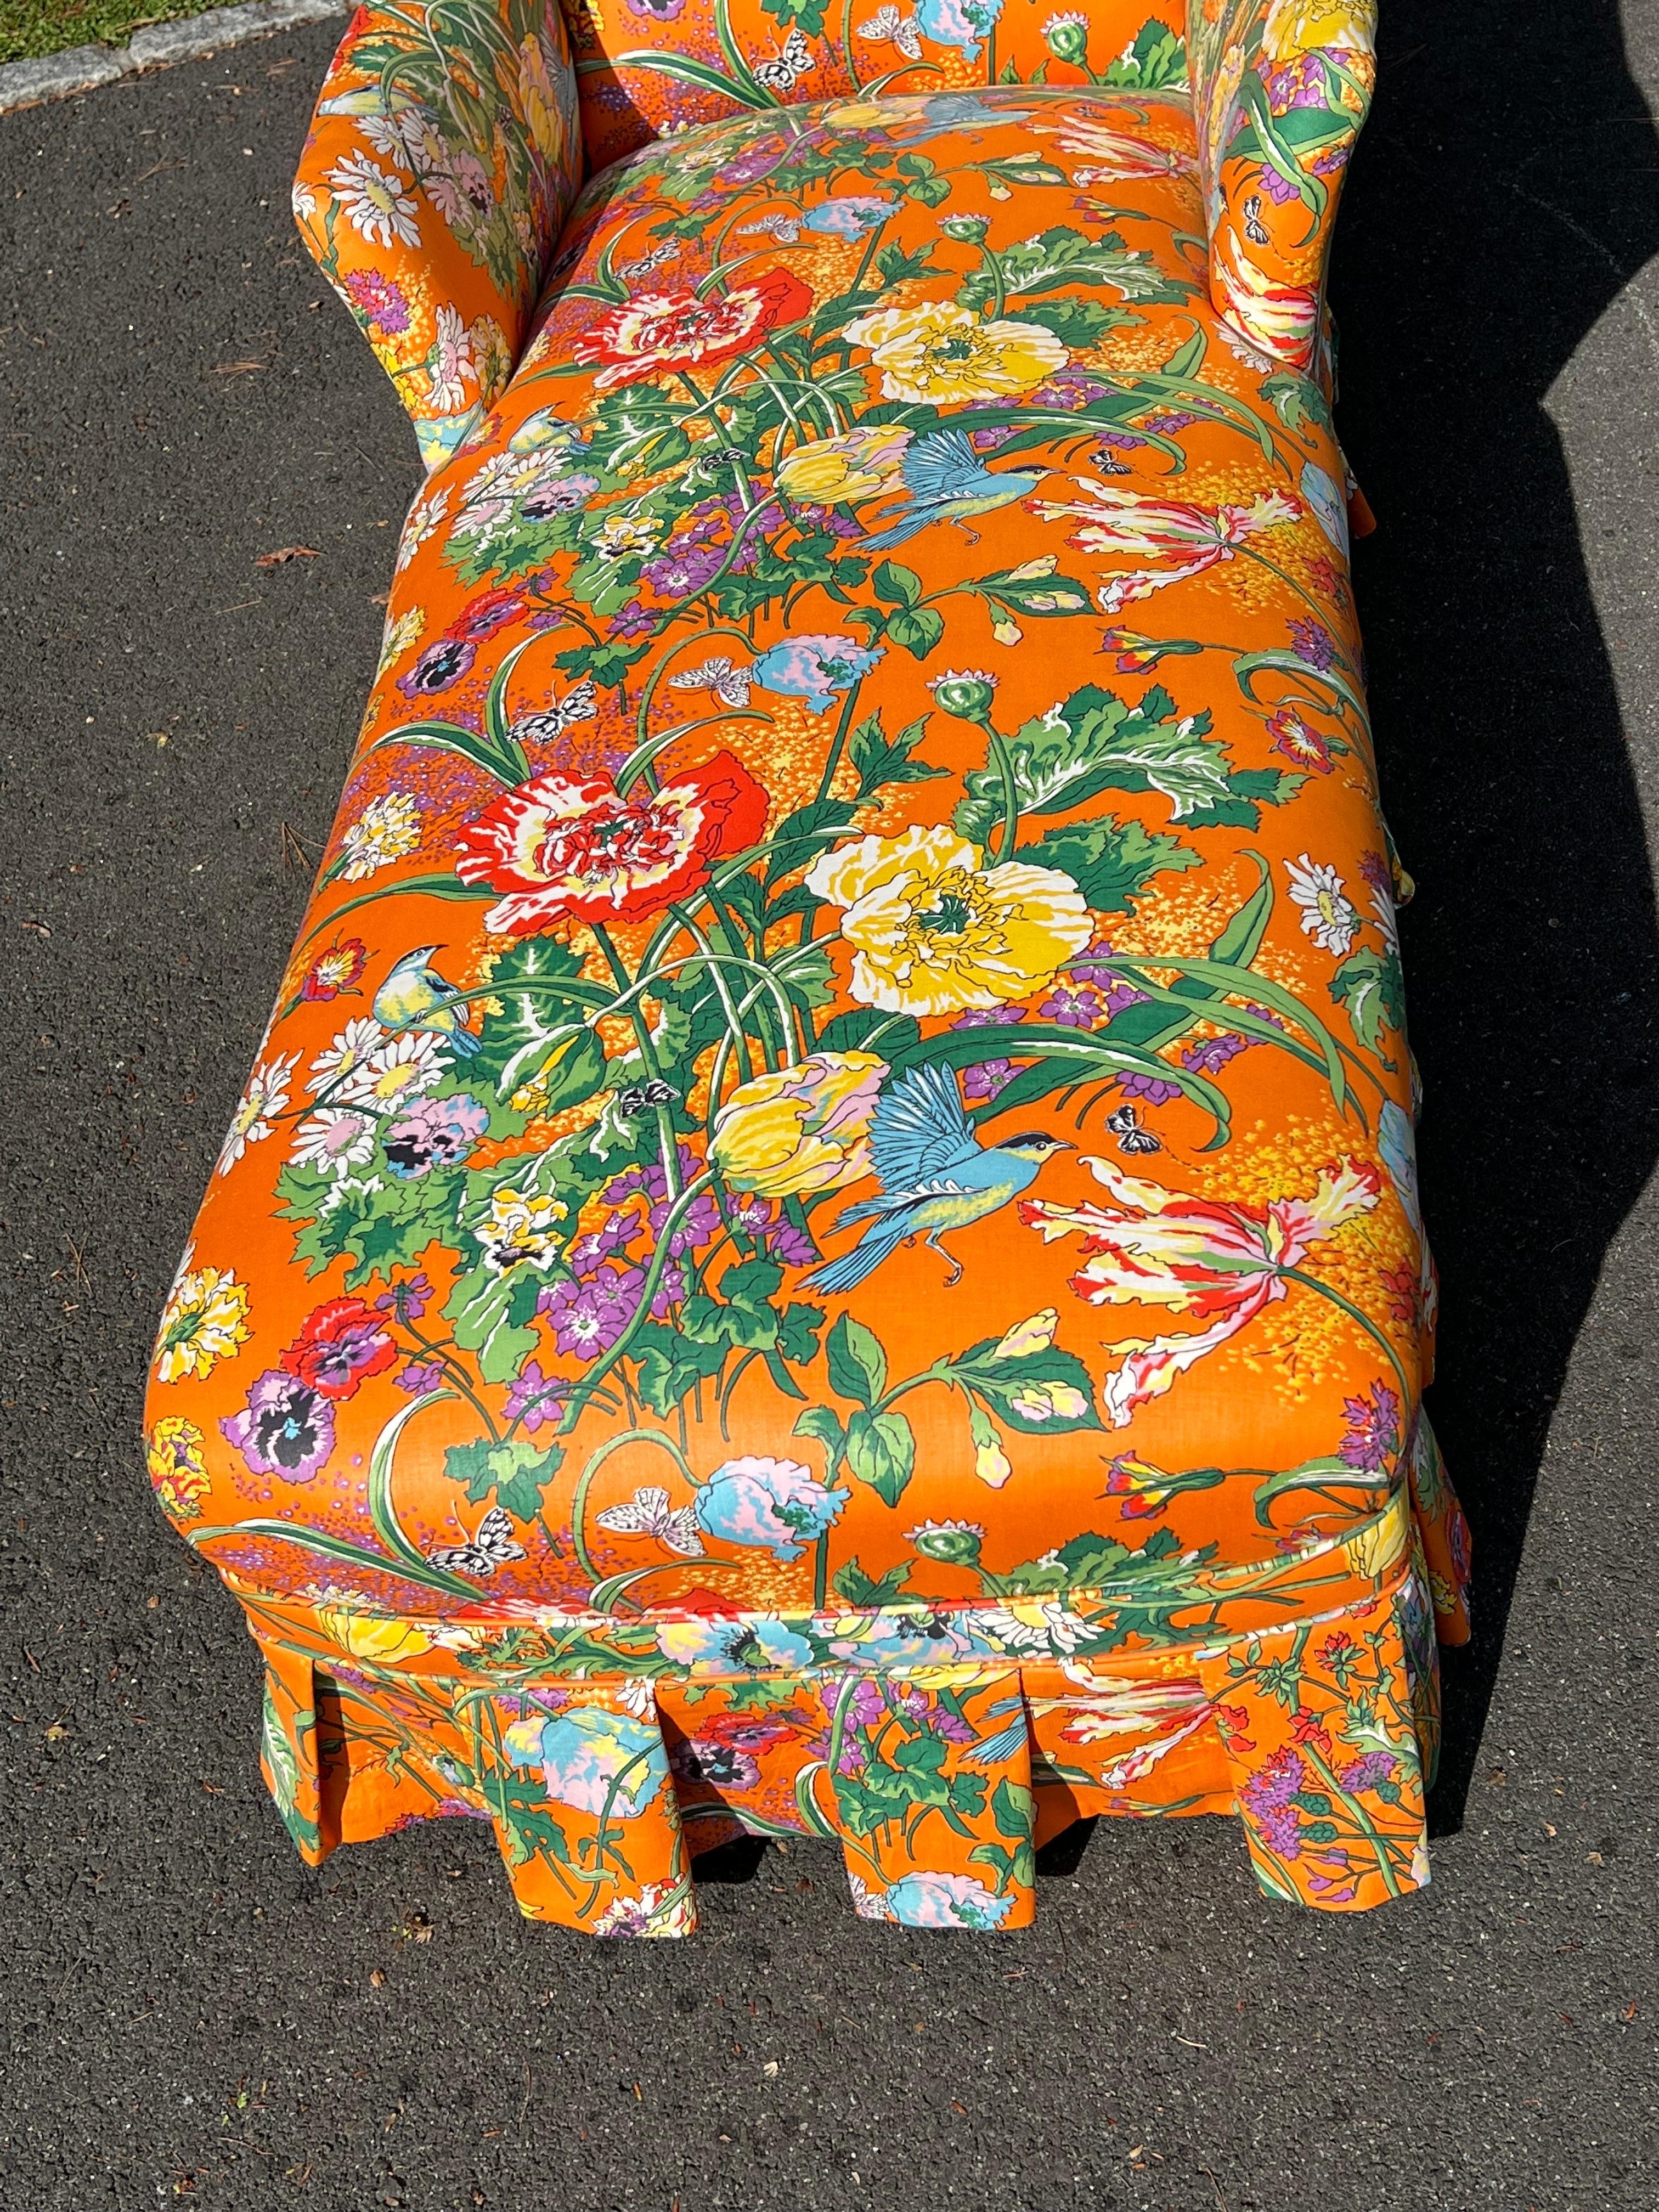 Retro Floral Chaise Lounge in Orange For Sale 4